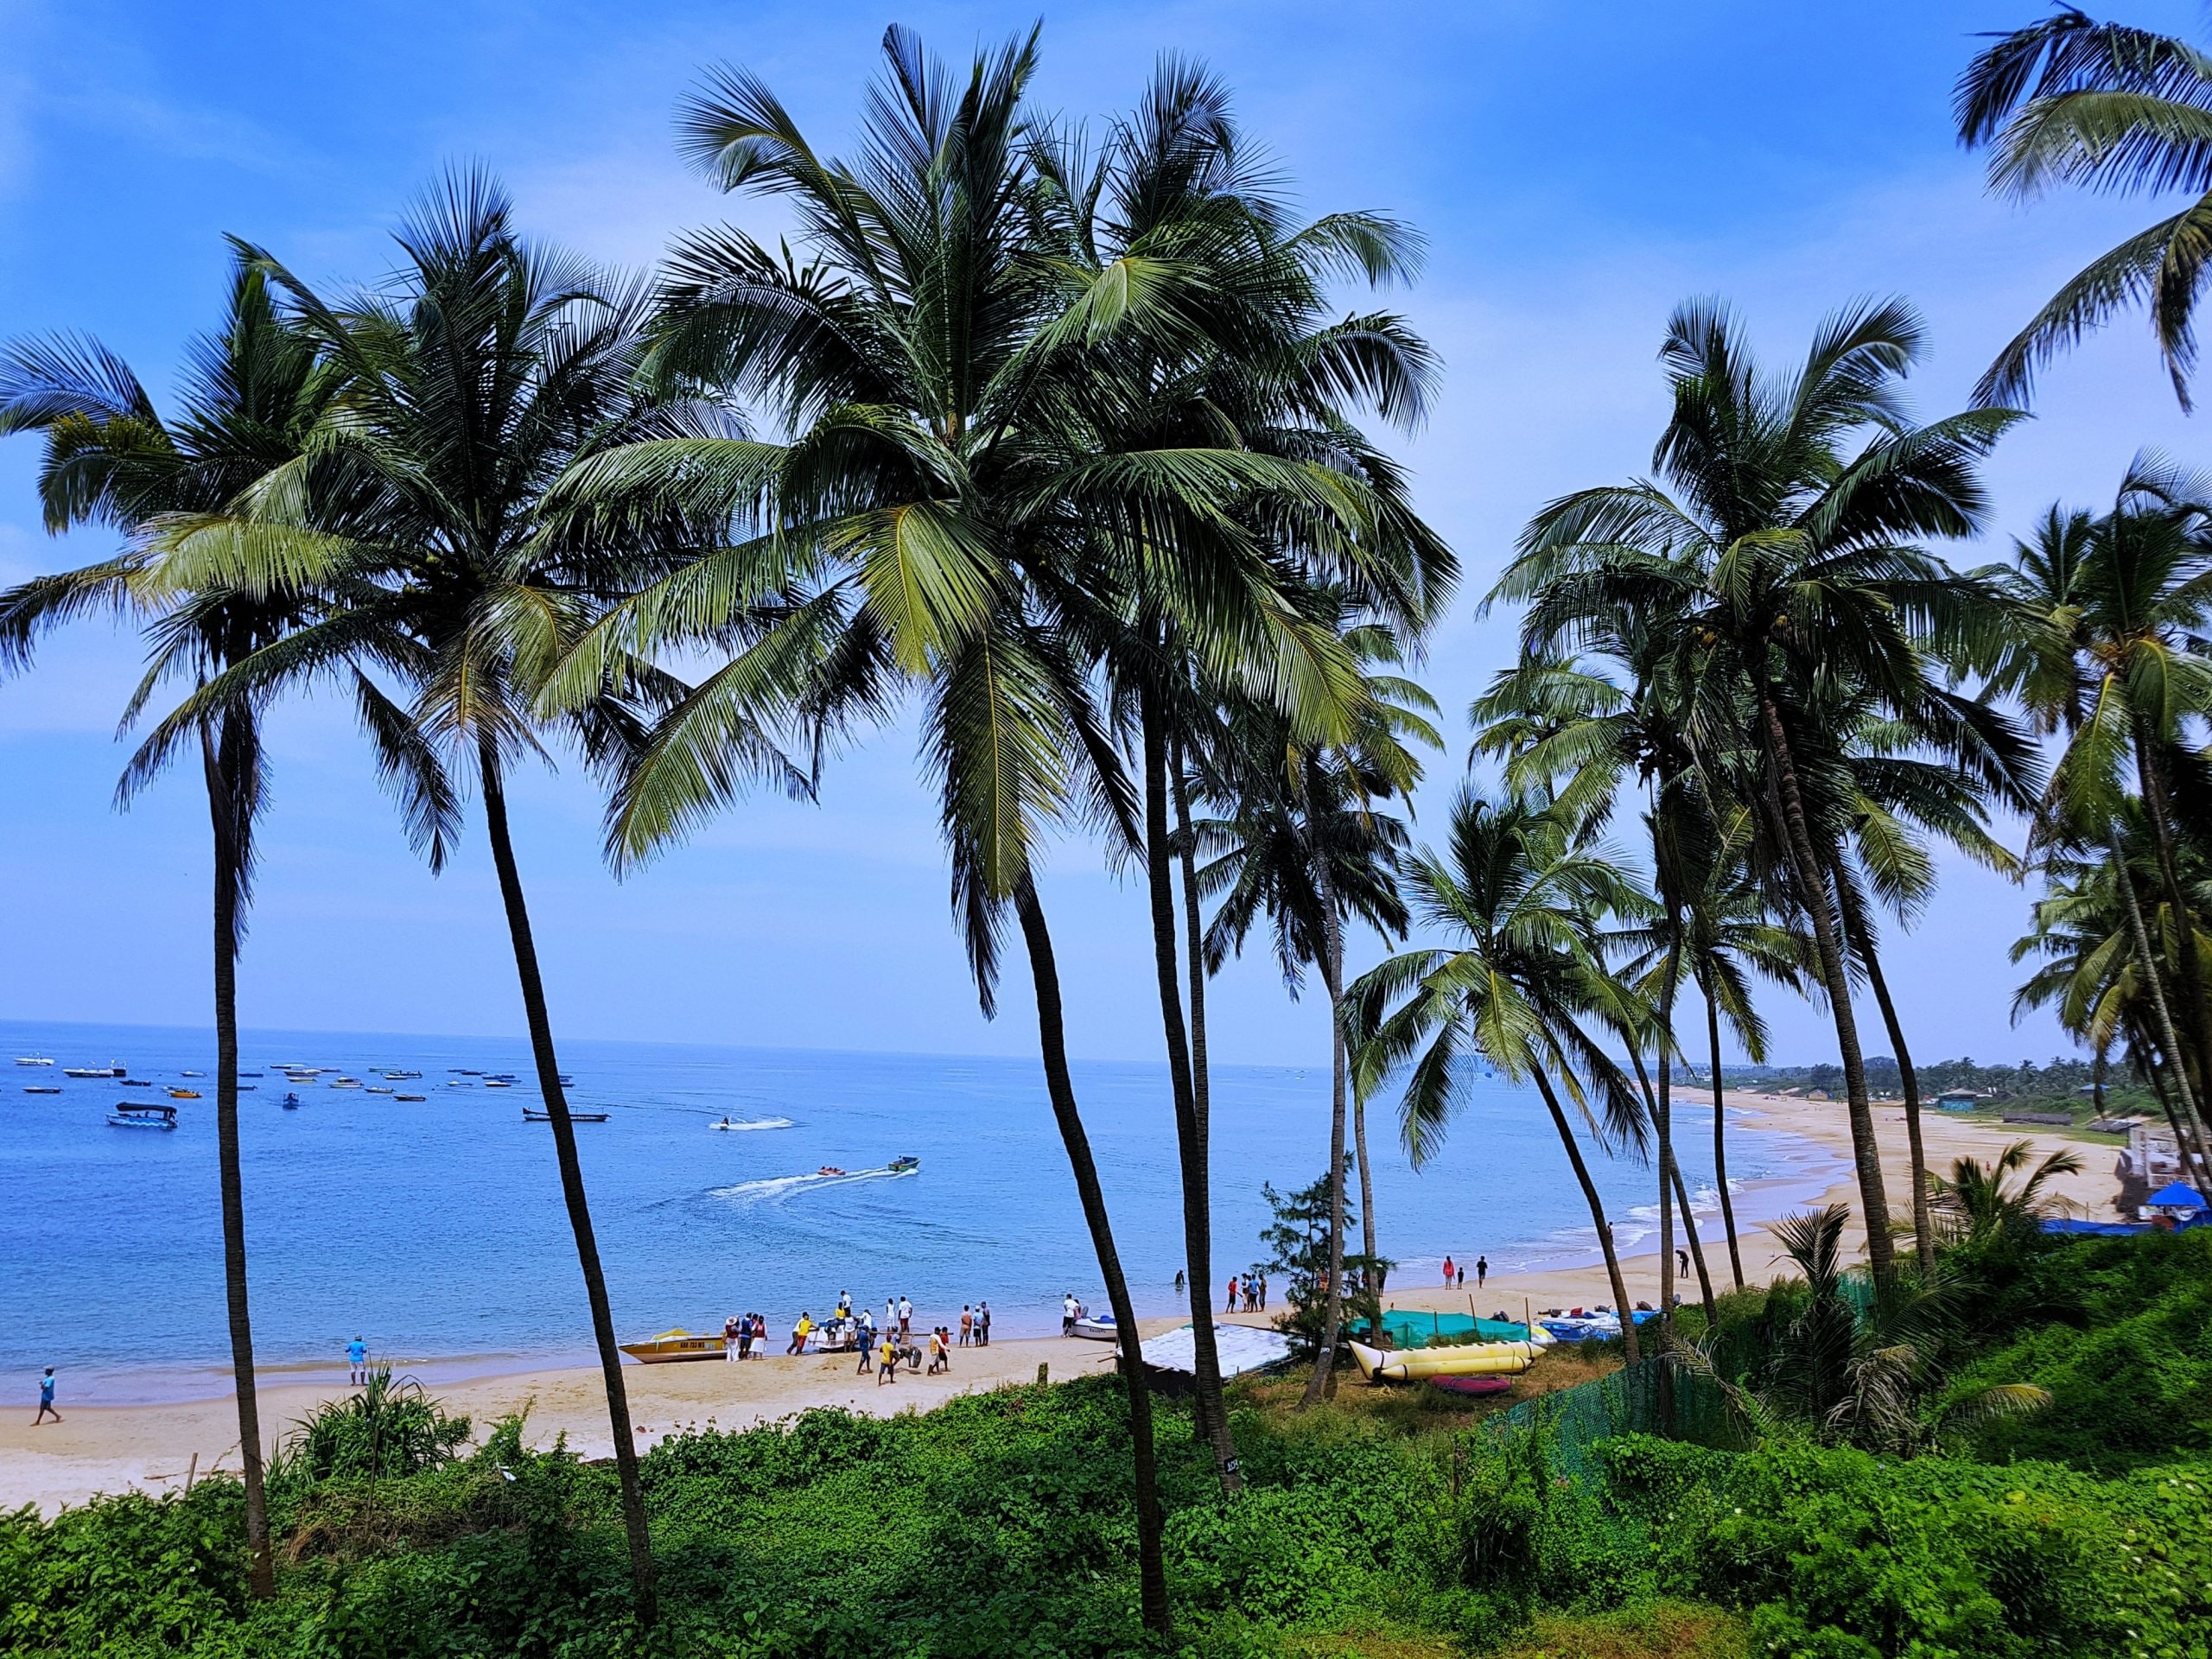 Located on the west coast of India, what is Goa most famous for?